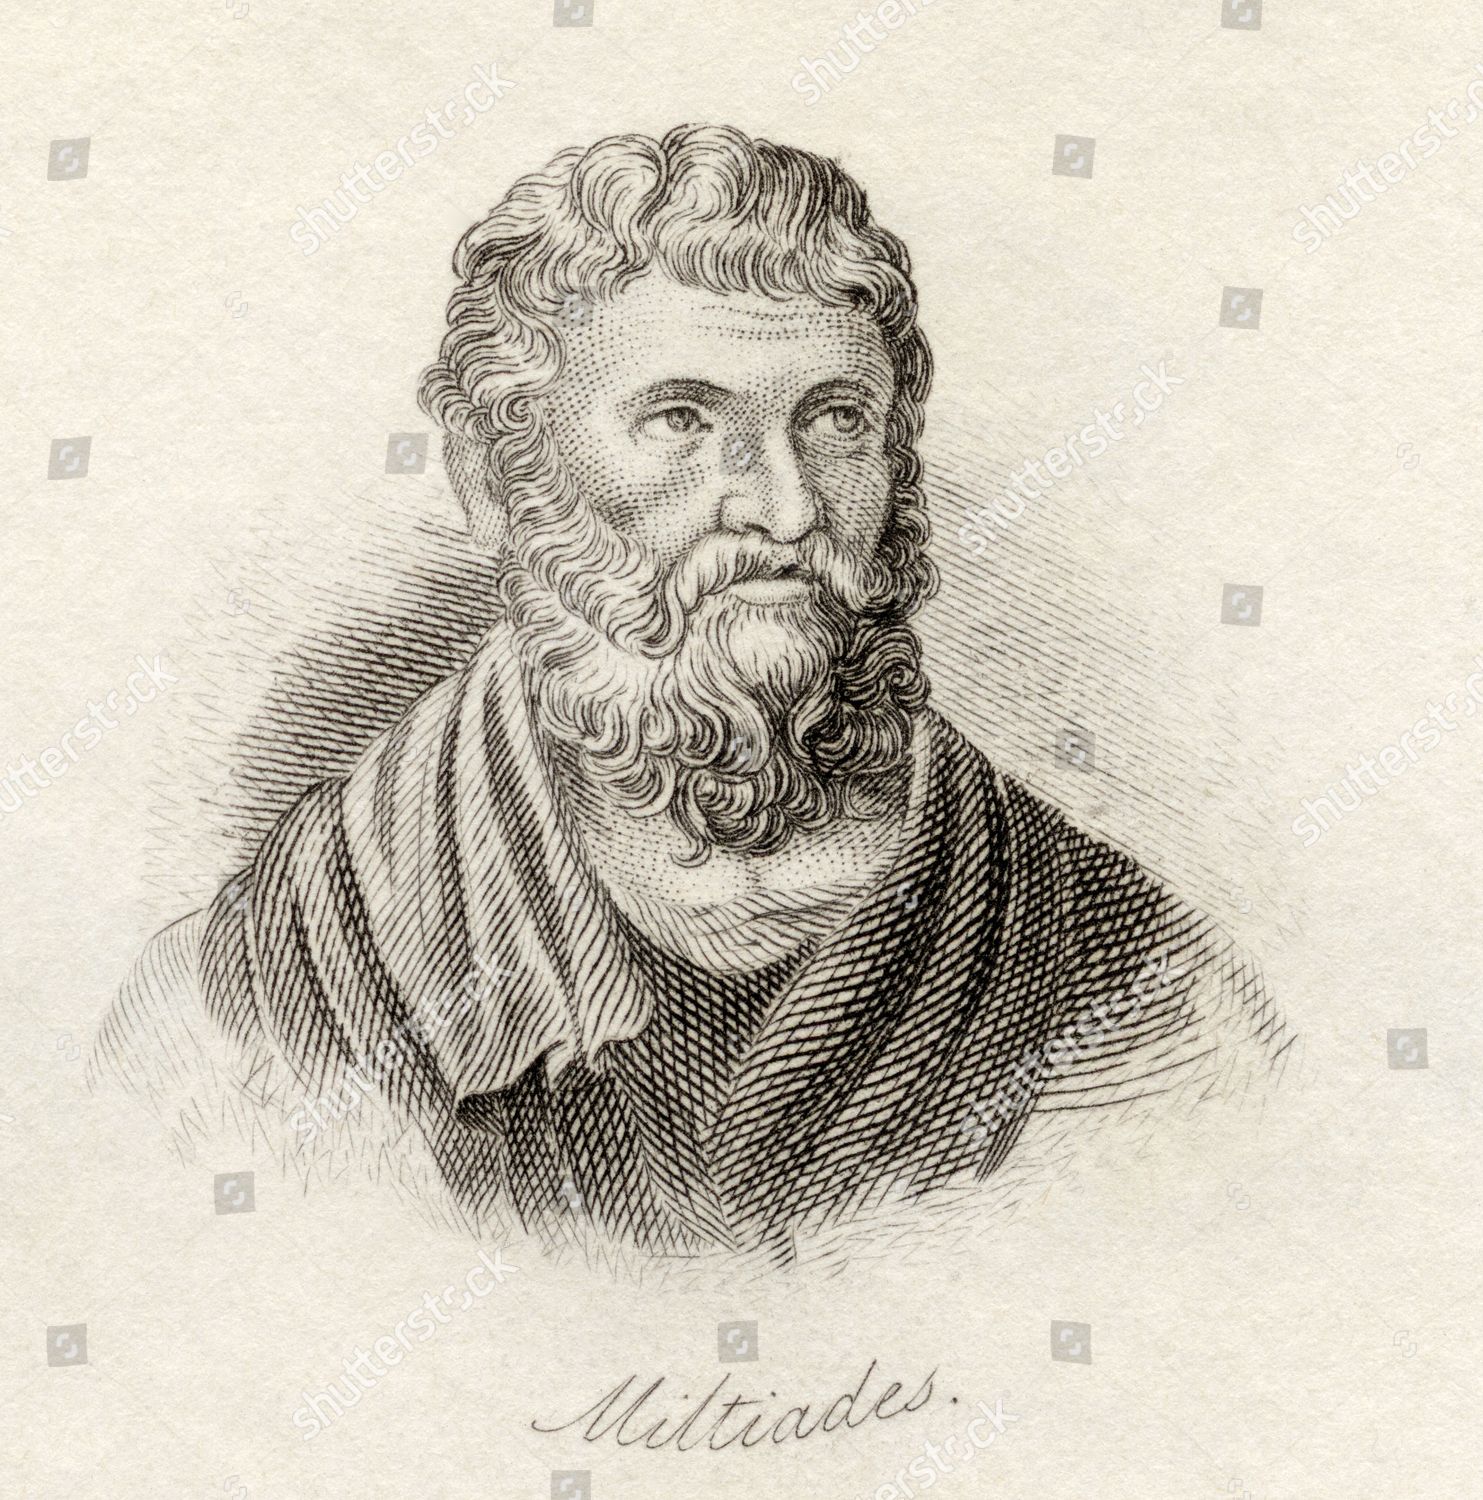 Miltiades Younger C 550 Bc489 Bc Editorial Stock Photo - Stock Image ...